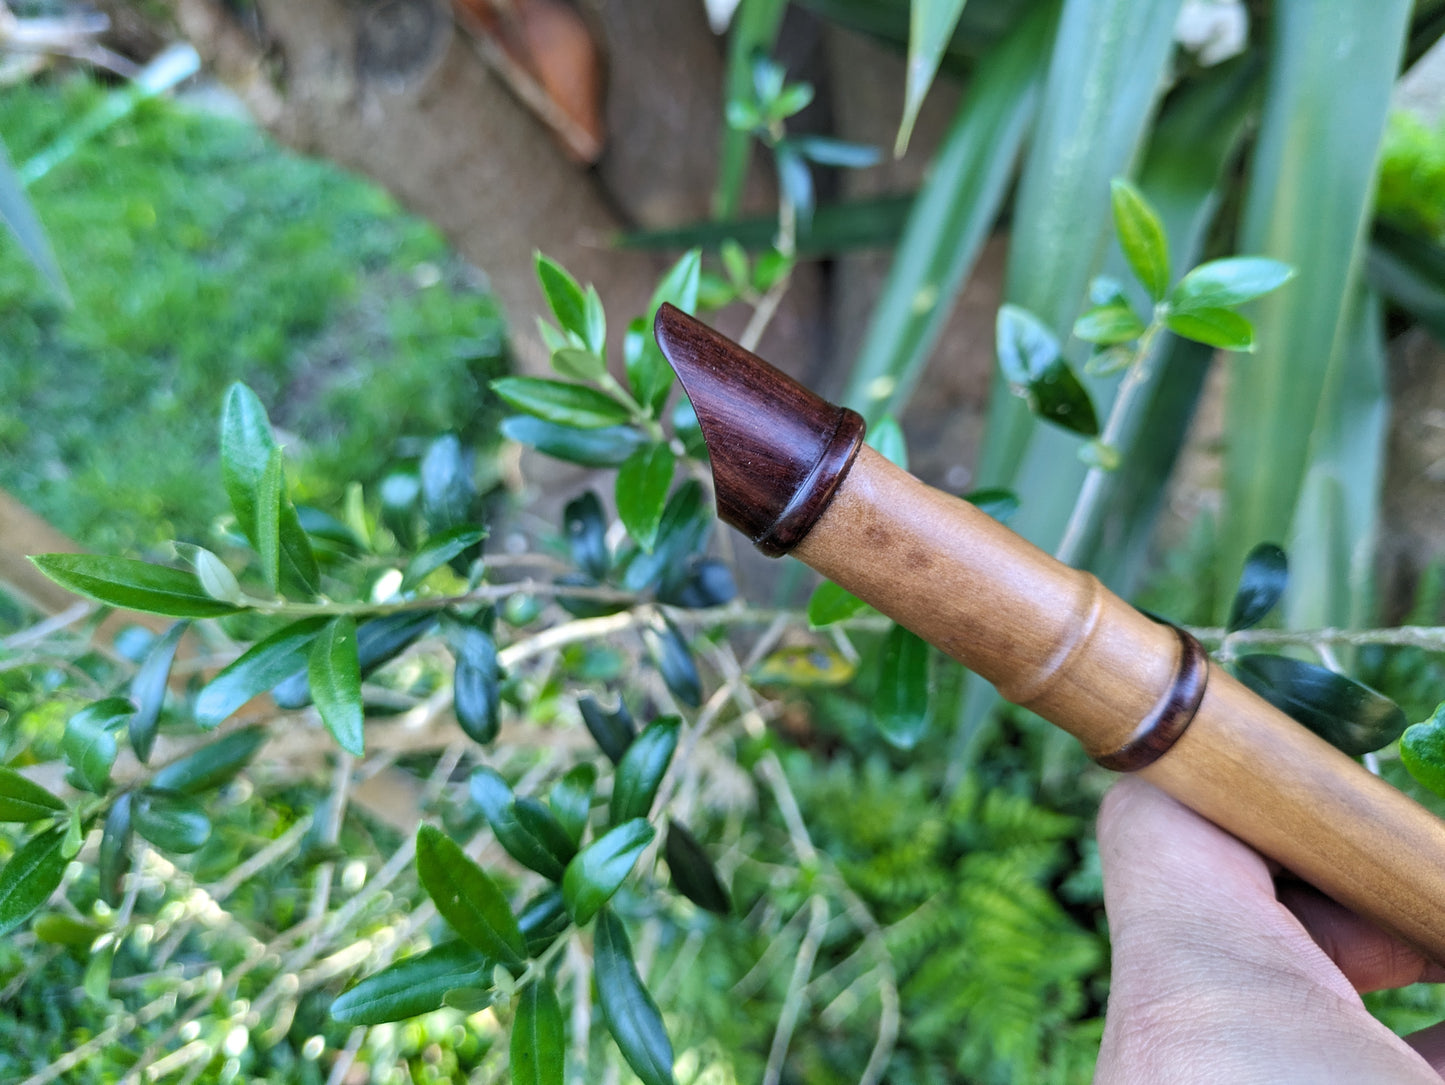 High E Whistle in Pearwood